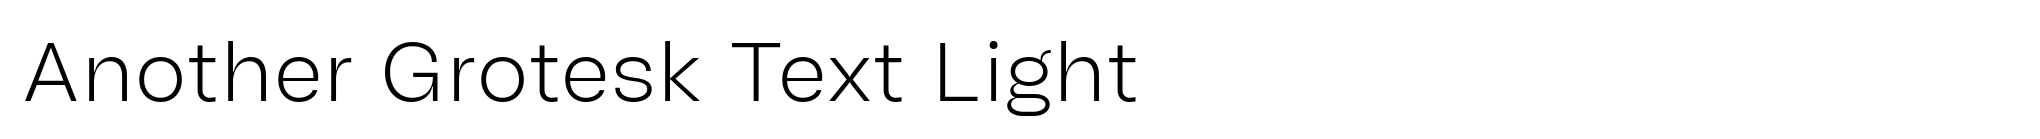 Another Grotesk Text Light image